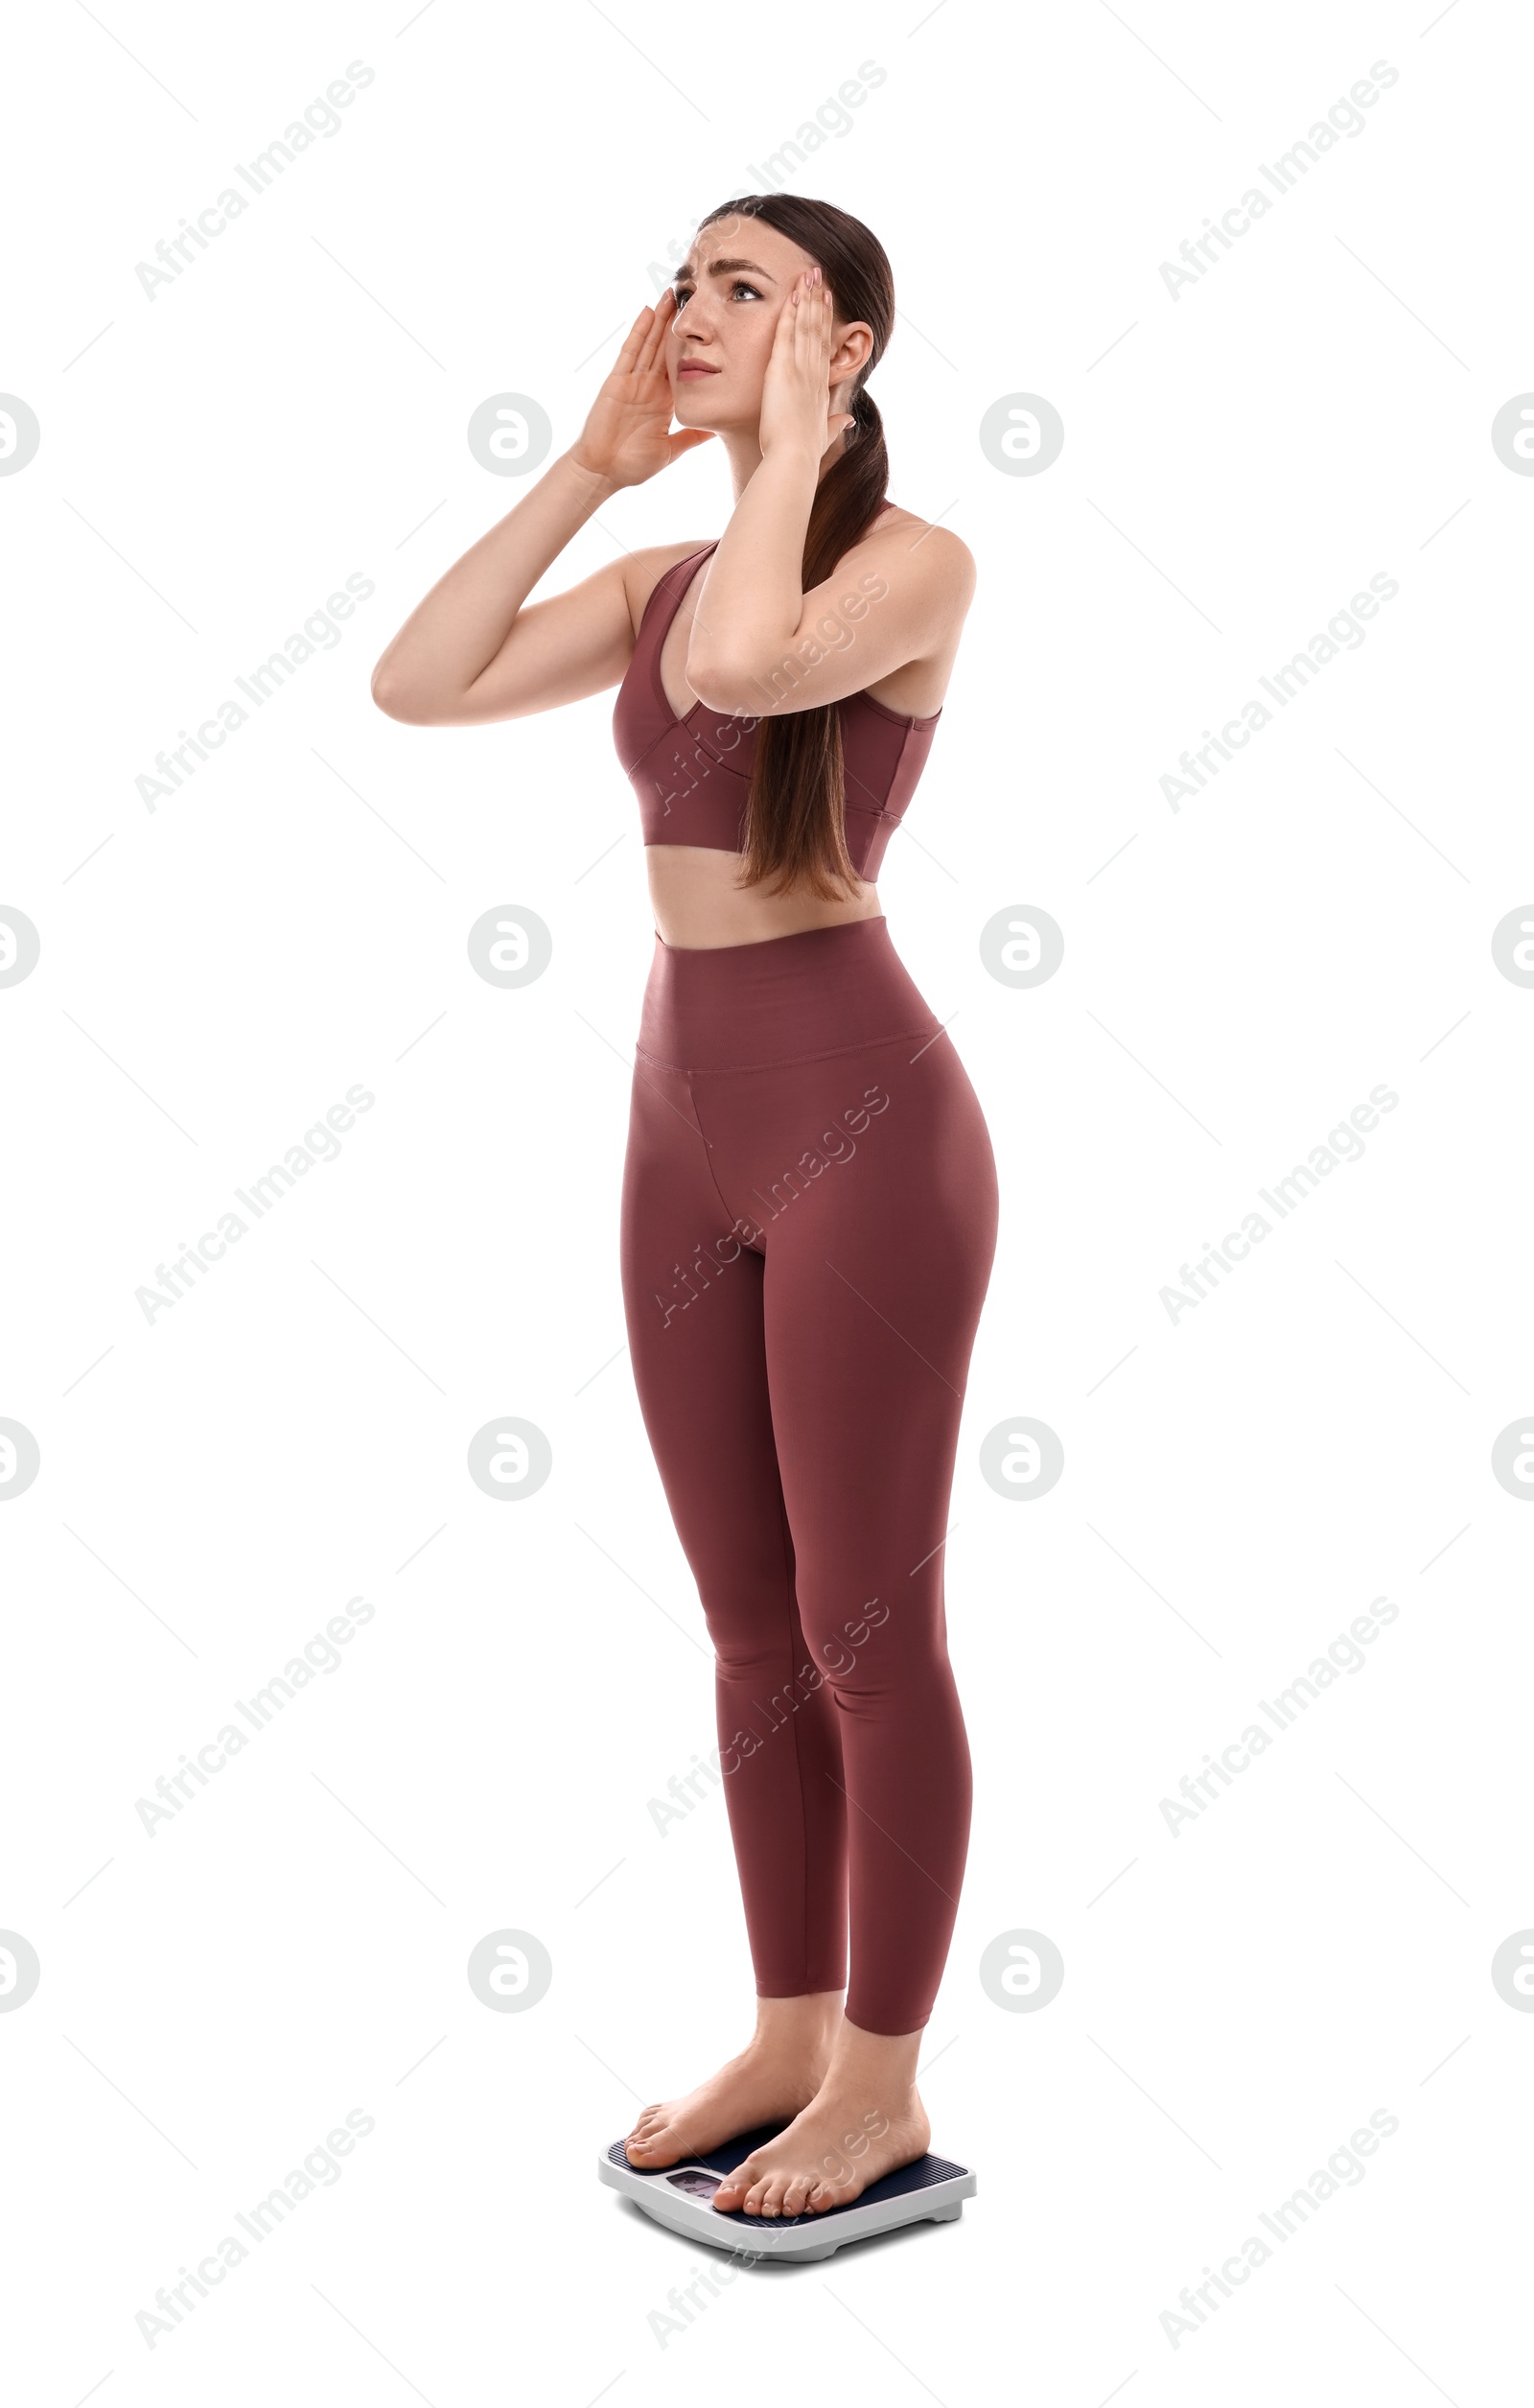 Photo of Worried woman standing on floor scale against white background